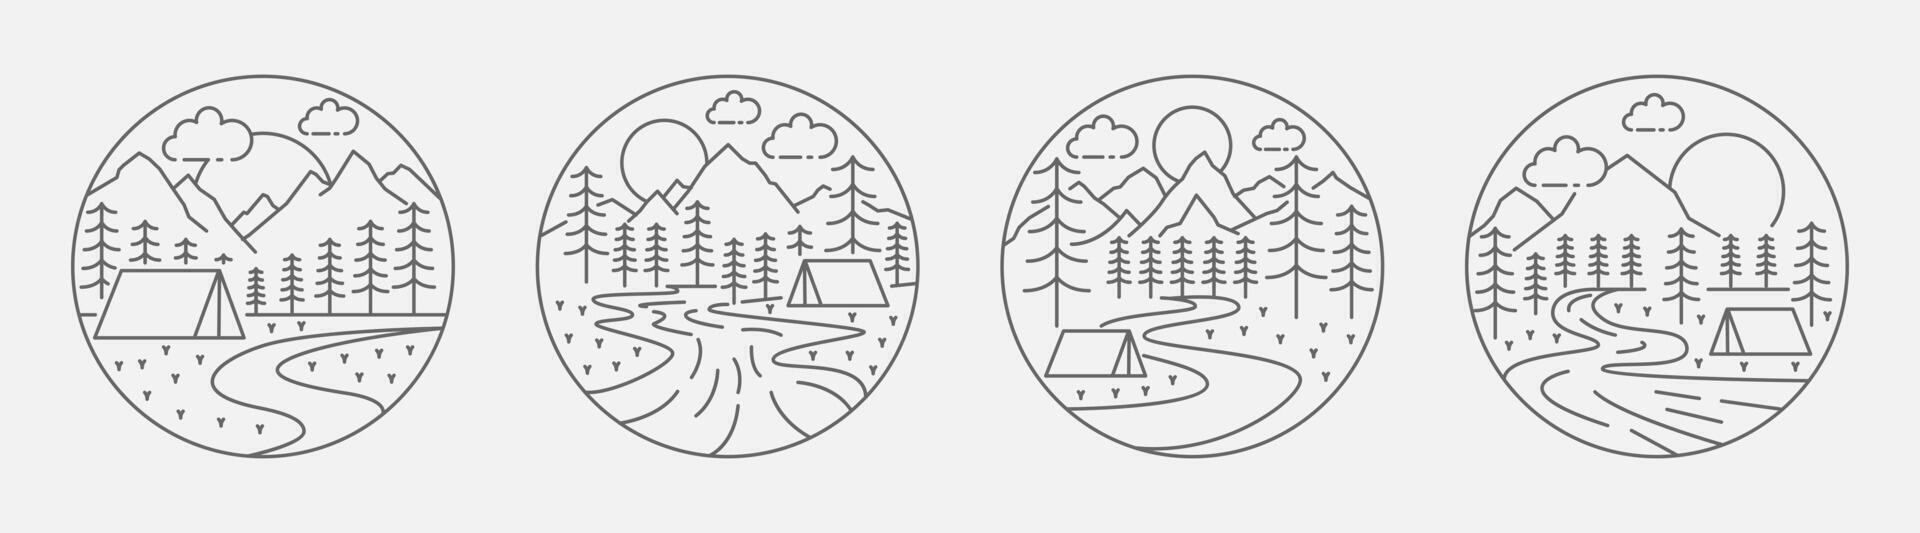 Collection of camping and mountain illustration with monoline or line art style, design can be for t-shirts, wrapping paper, printing needs vector